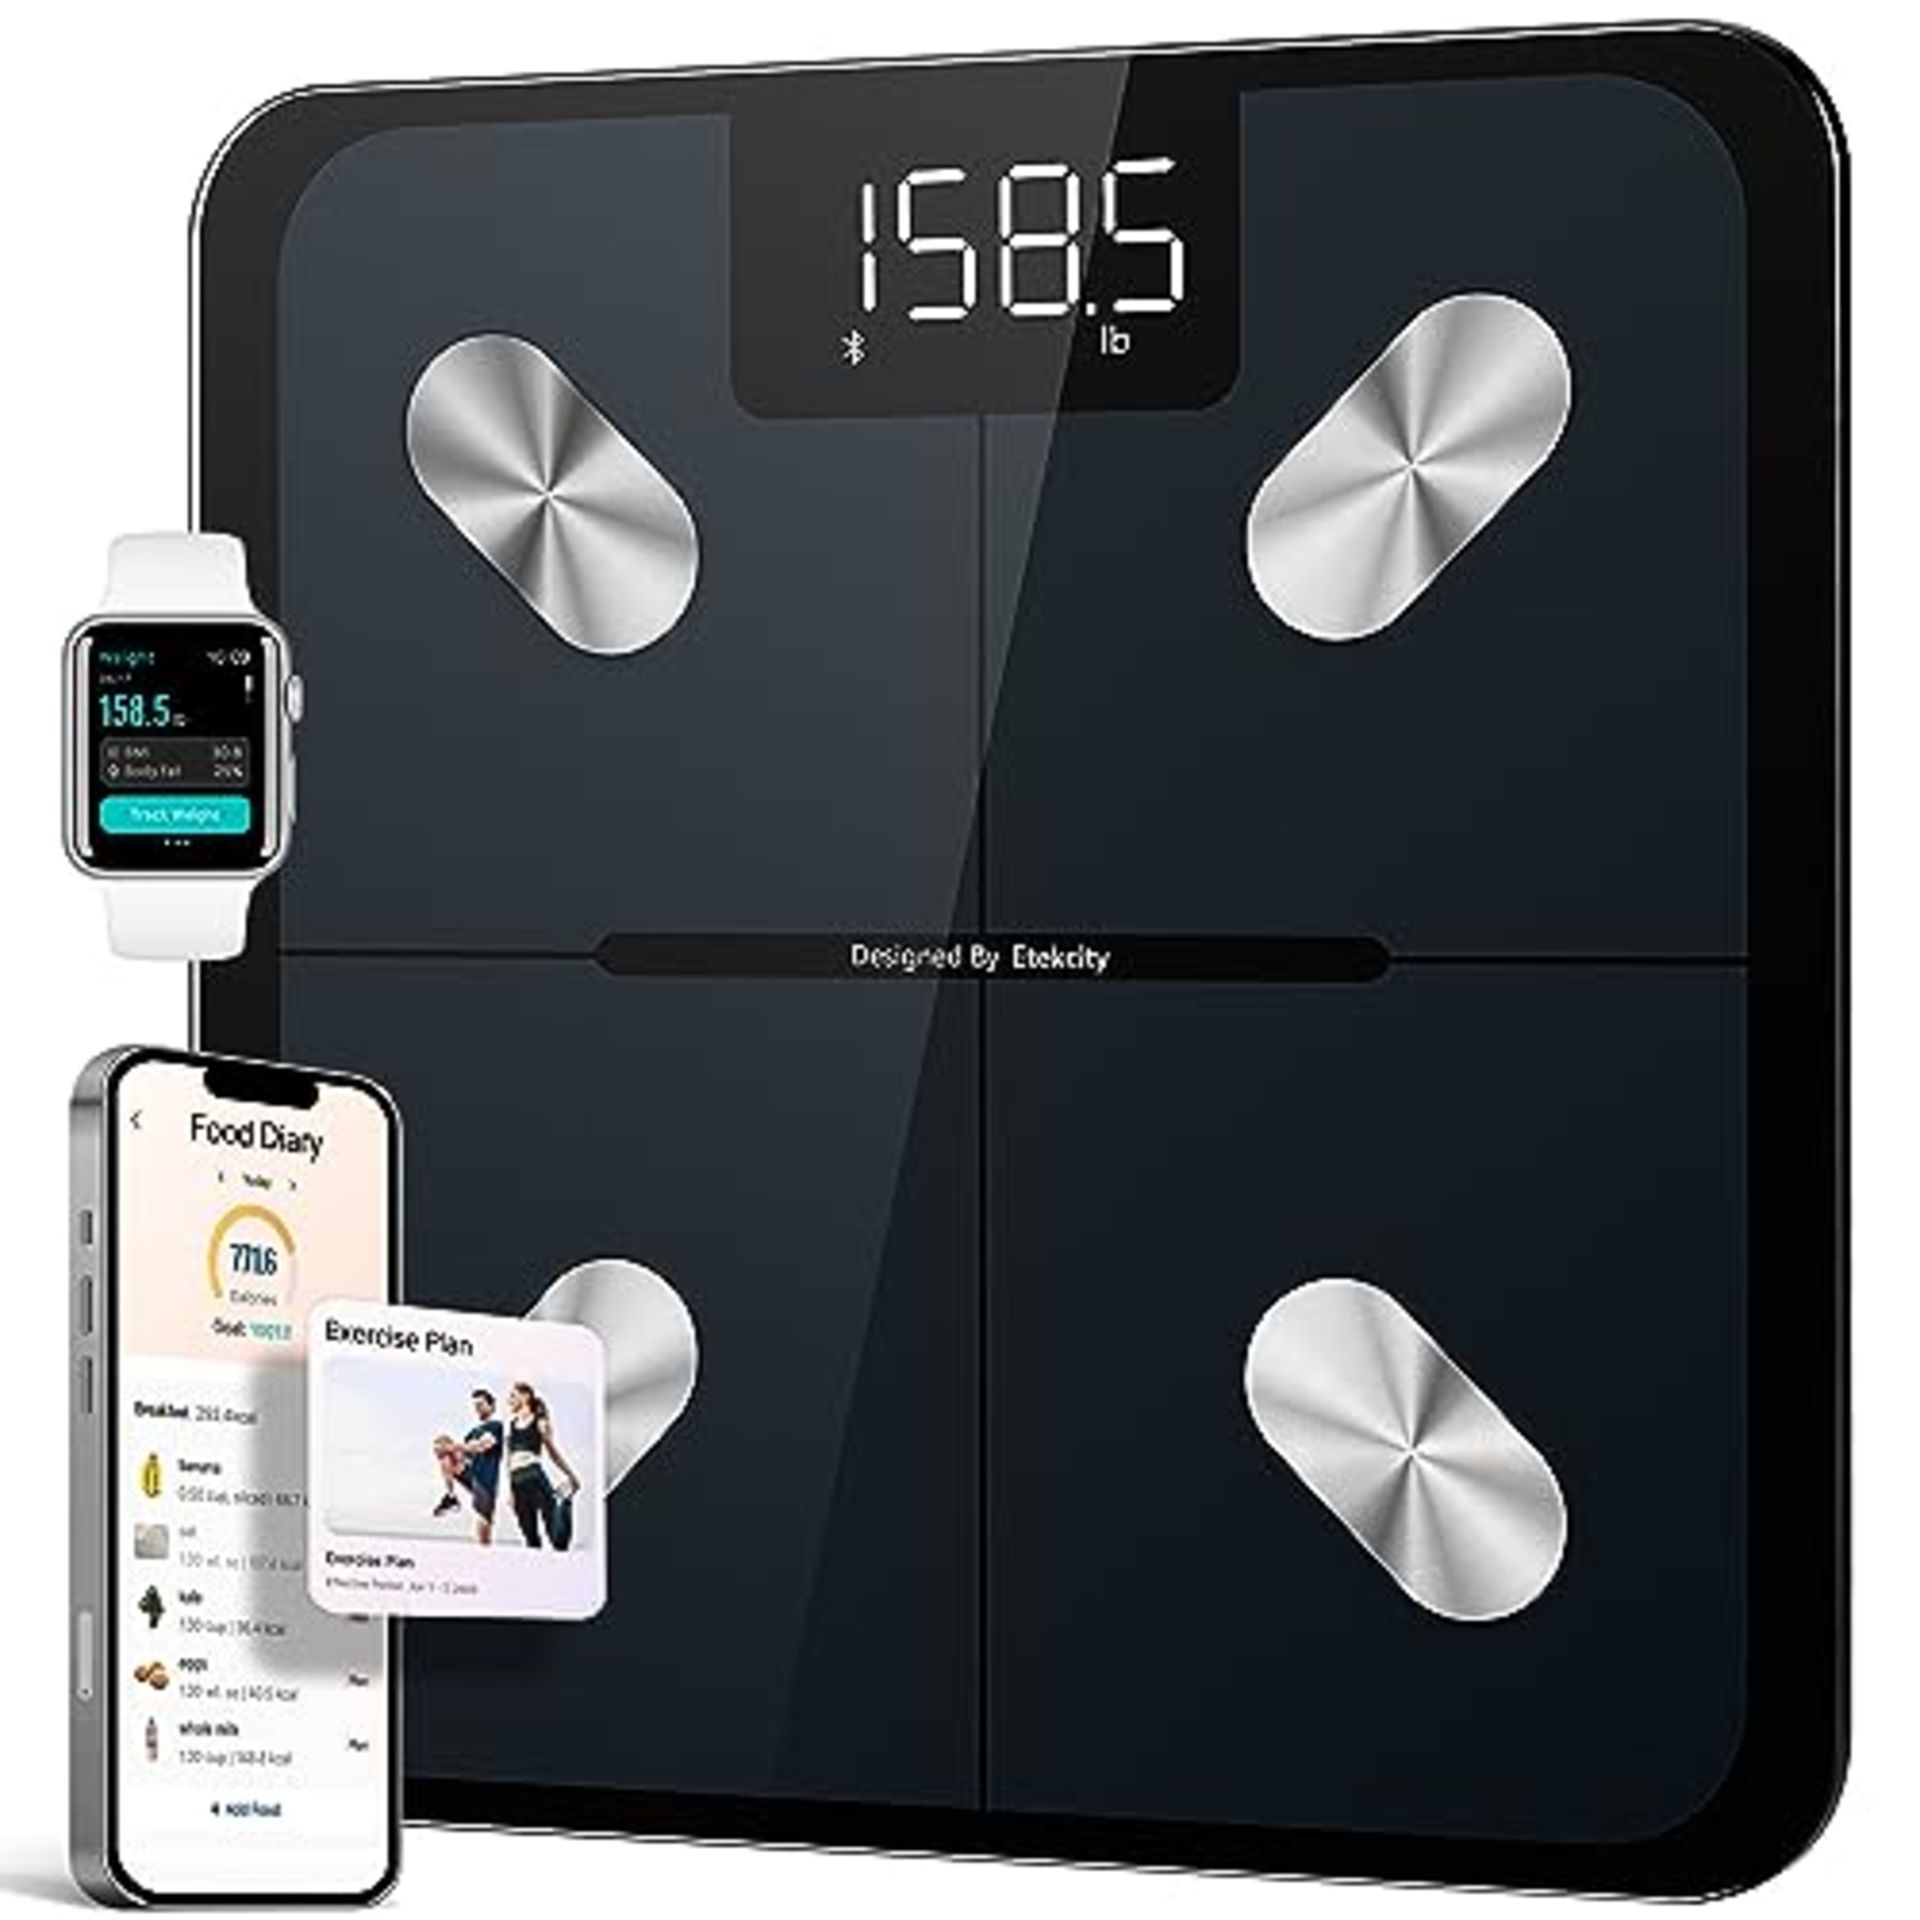 Etekcity Smart Bathroom Scales for Body Weight, Accurate to 0.05lb (0.02kg) Digital We